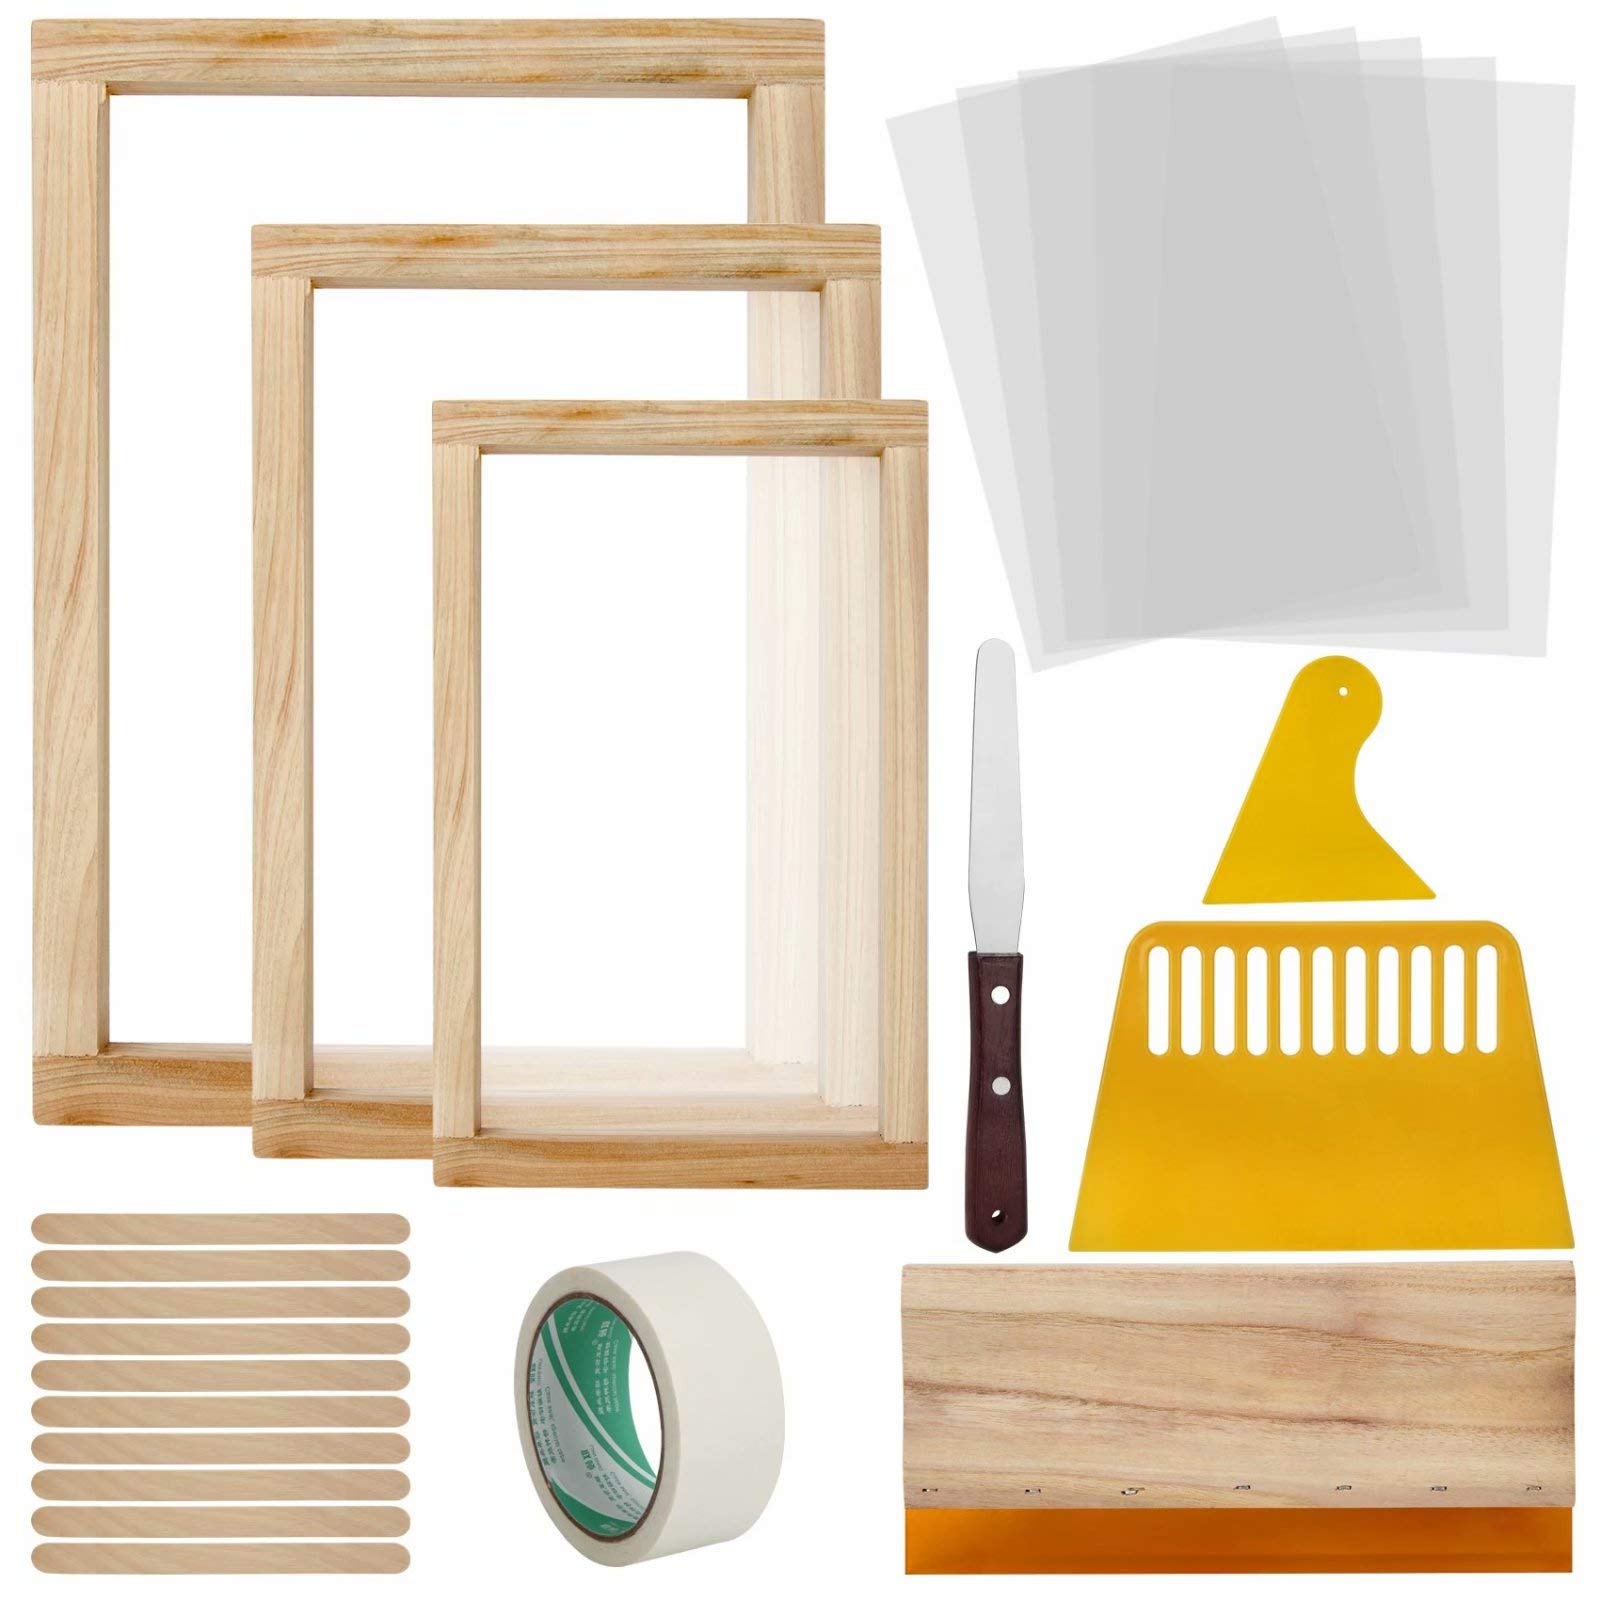 6 Pieces 3 Size Wood Silk Screen Printing Frame With Mesh for Screen  Printing, 10 X 14 Inch, 8 X 12 Inch, 6 X 10 Inch 